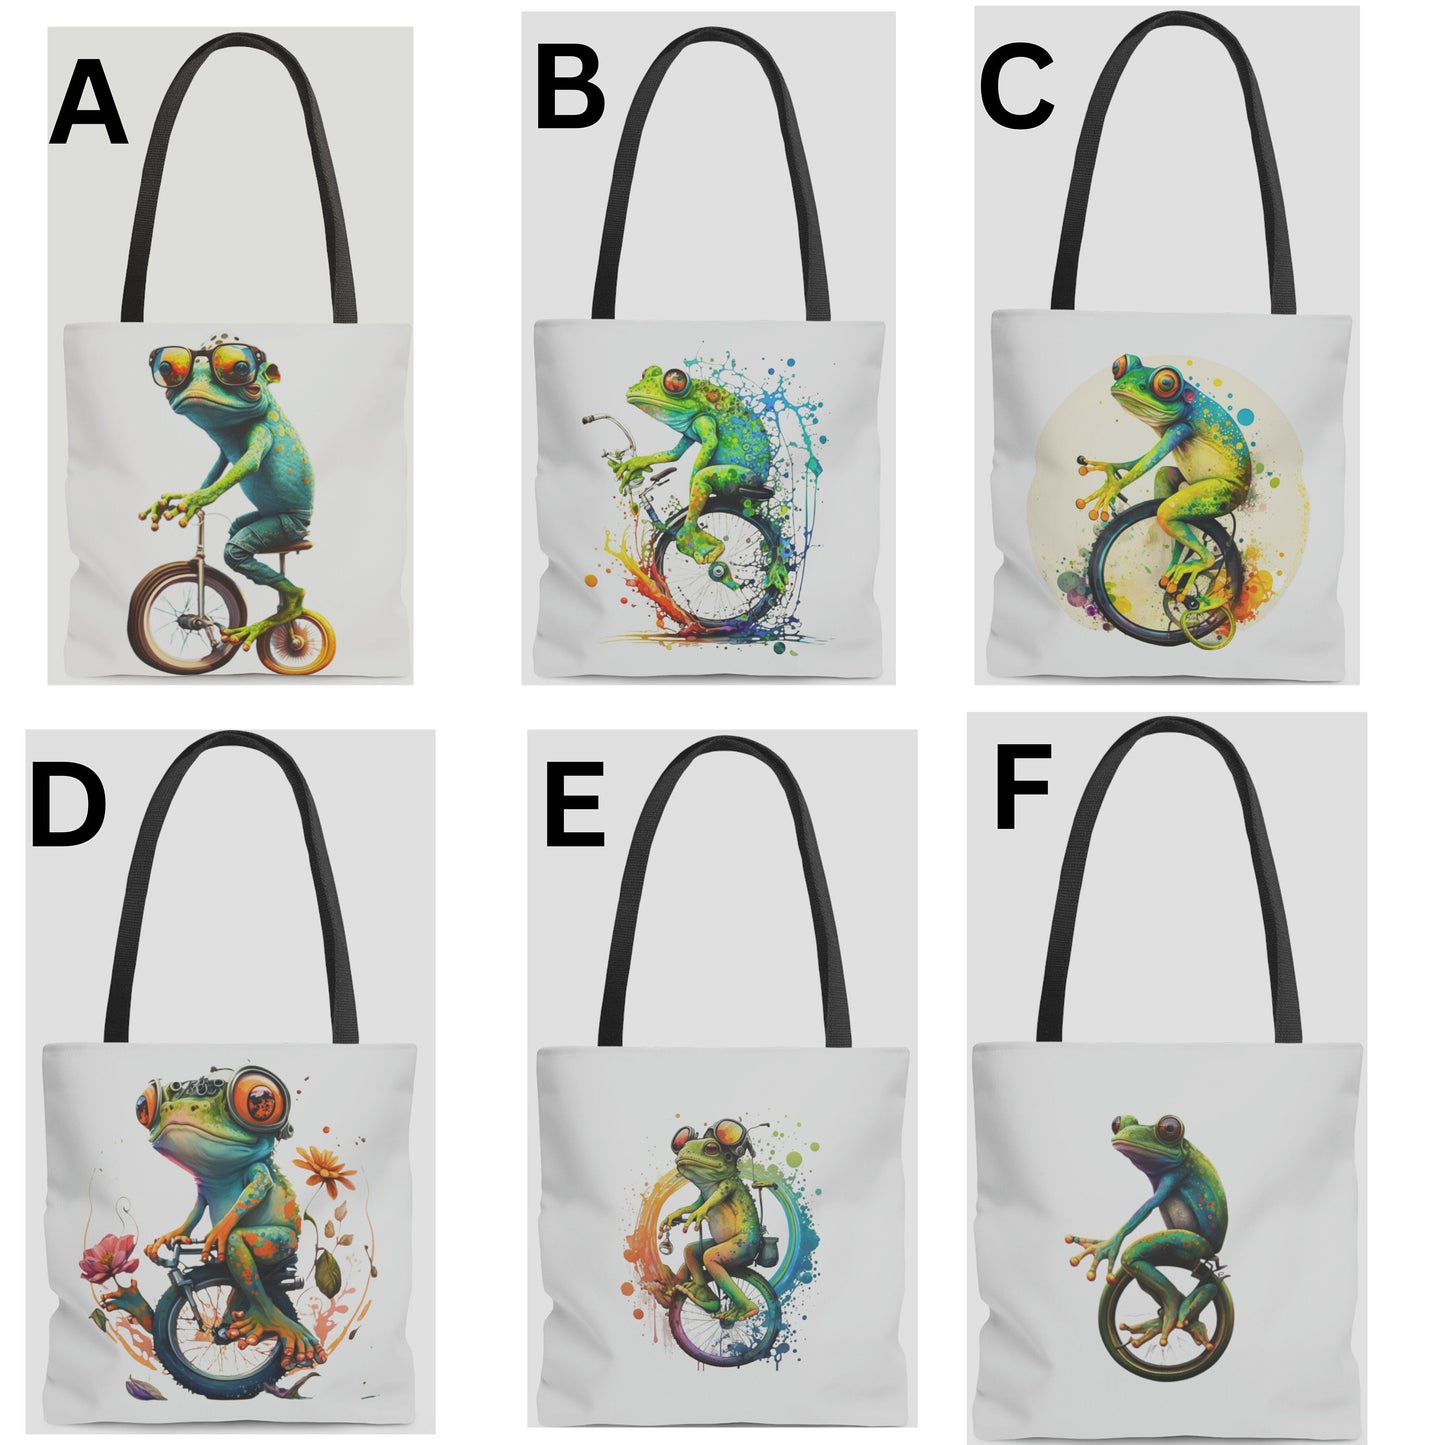 Reusable Shopping Bag Featuring a Charming Frog Riding a Bicycle